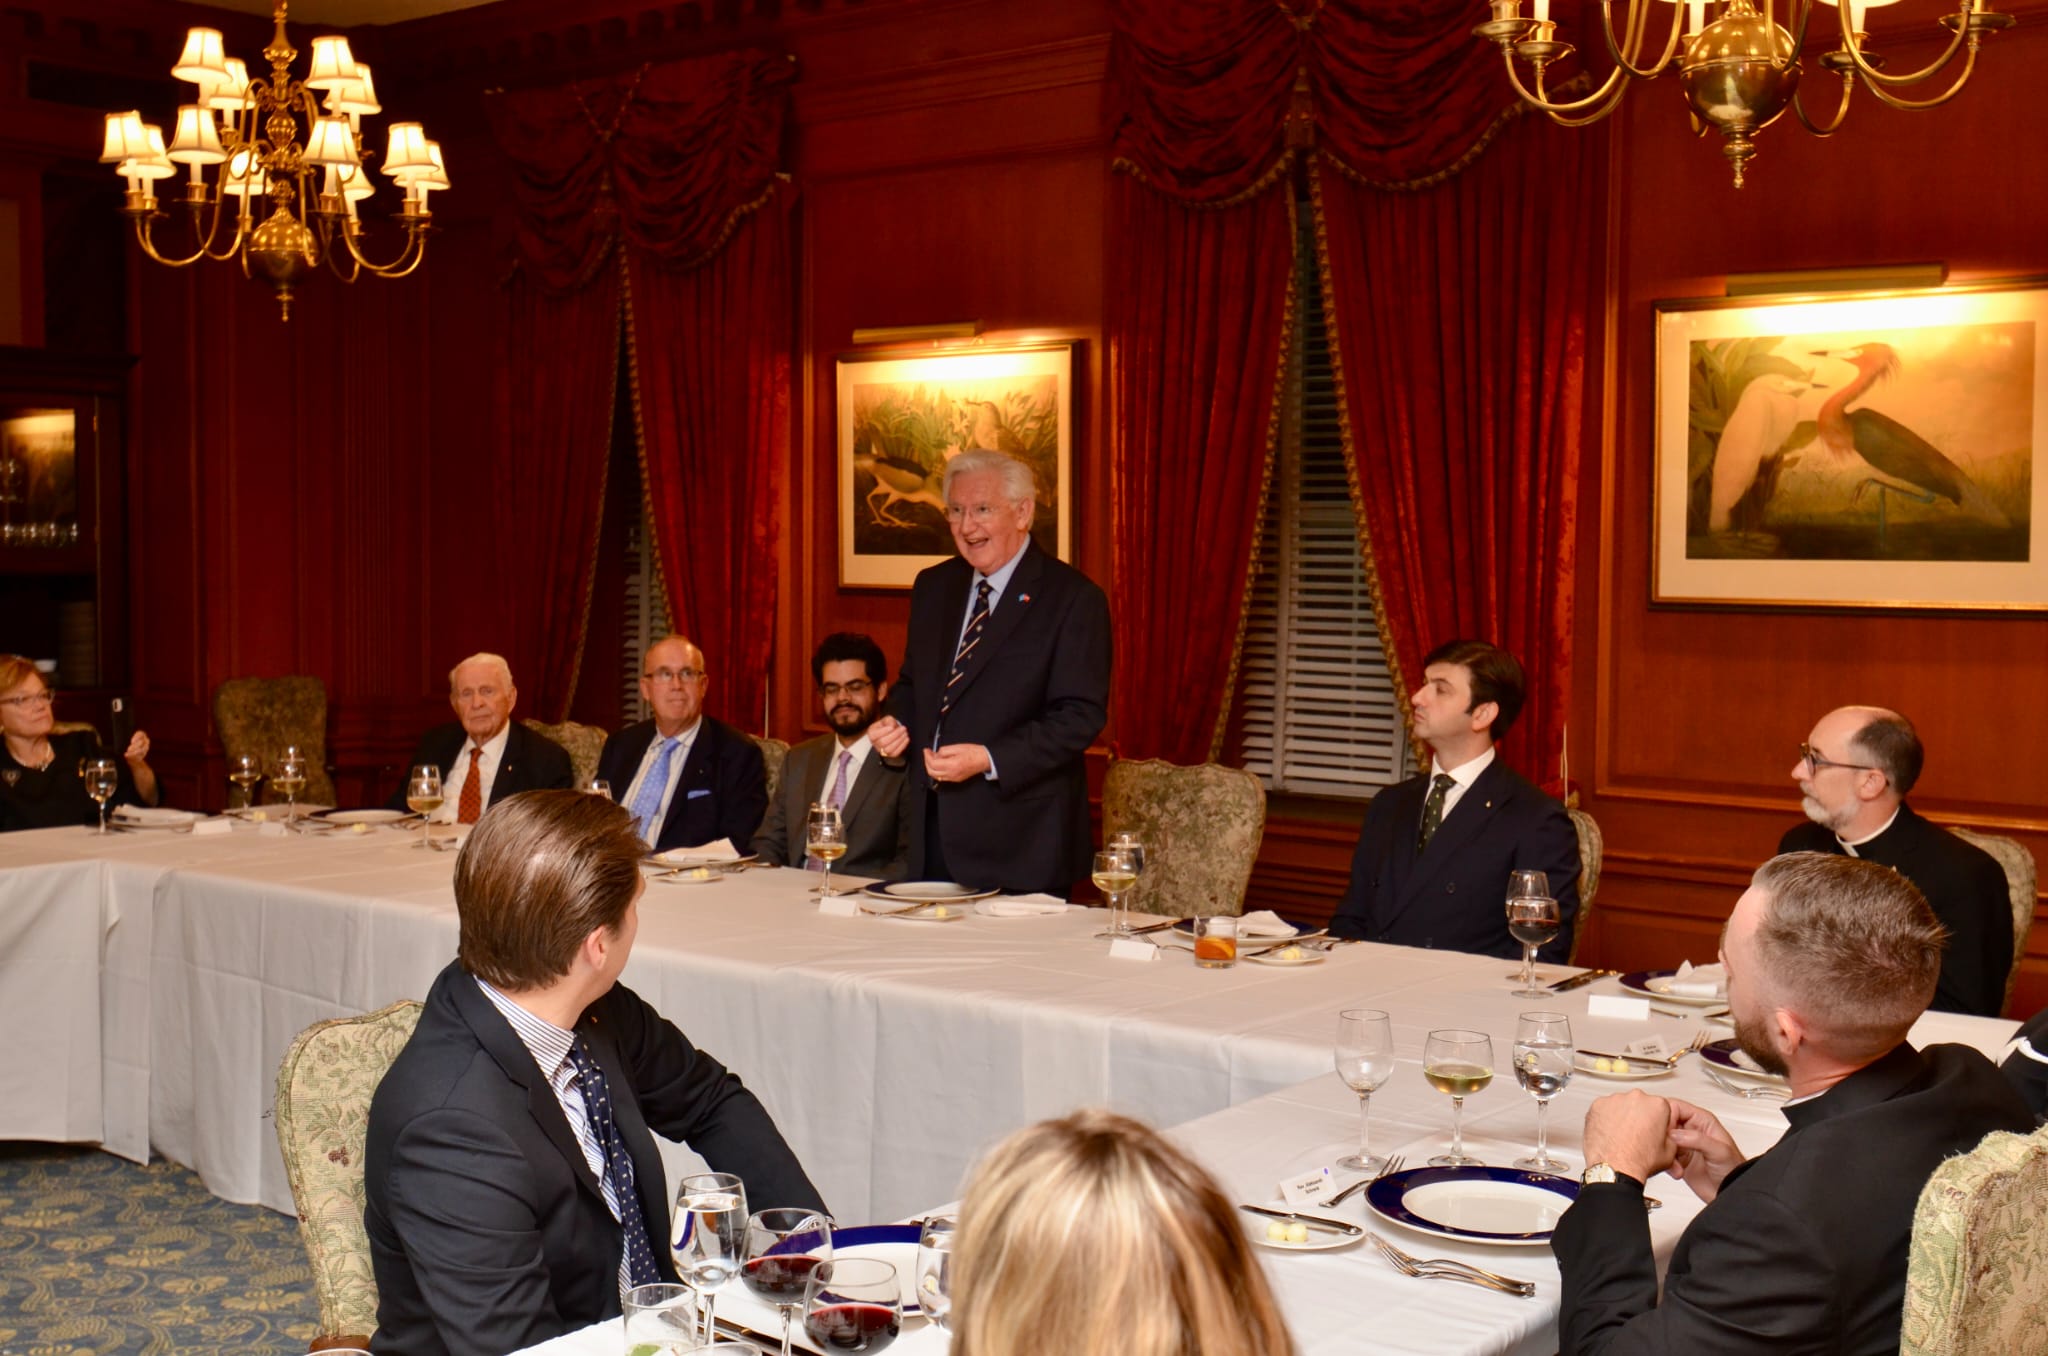 Amb. Dr. Paul Beresford-Hill attended the 5th Annual Dinner of the Federal Association for Young Knights and Dames